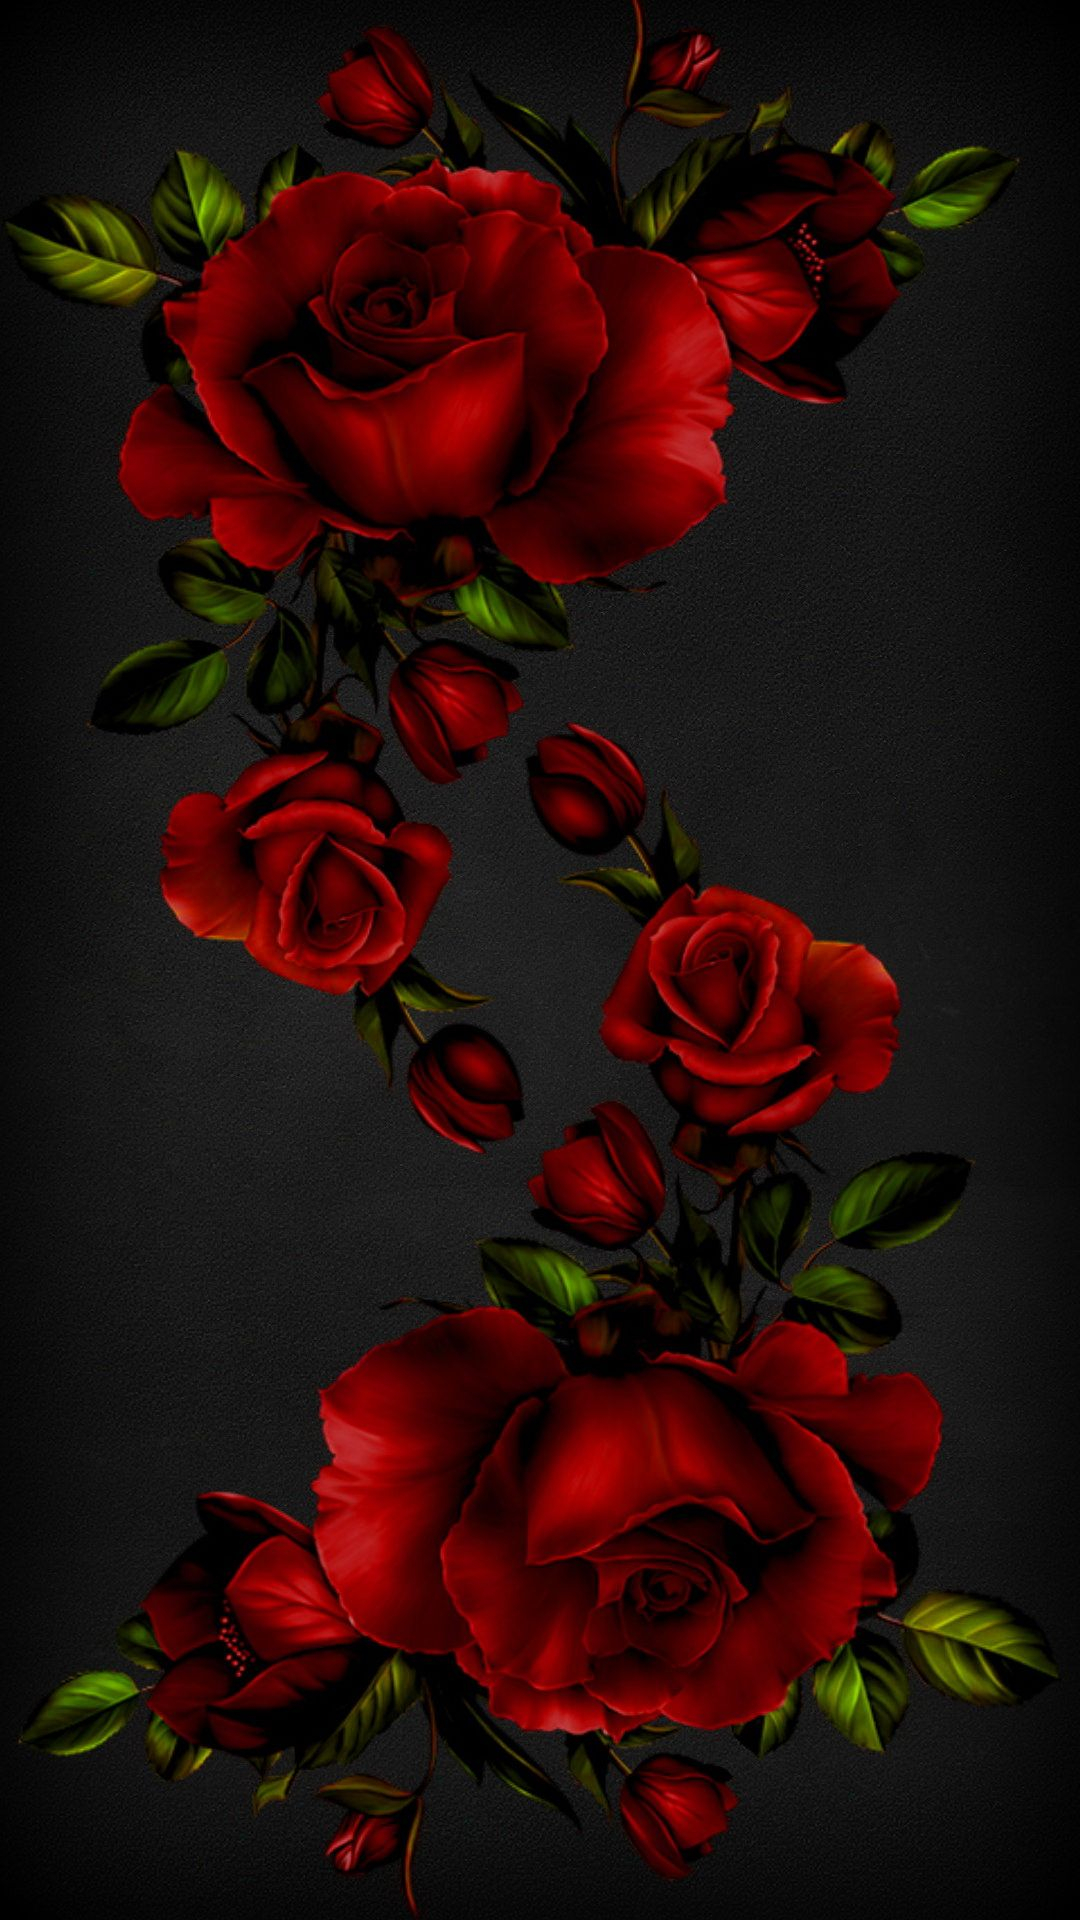 1080x1920 Pin by S on Flowery\u0026Flowers | Red roses wallpaper, Flower phone wallpaper, Flower wallpaper